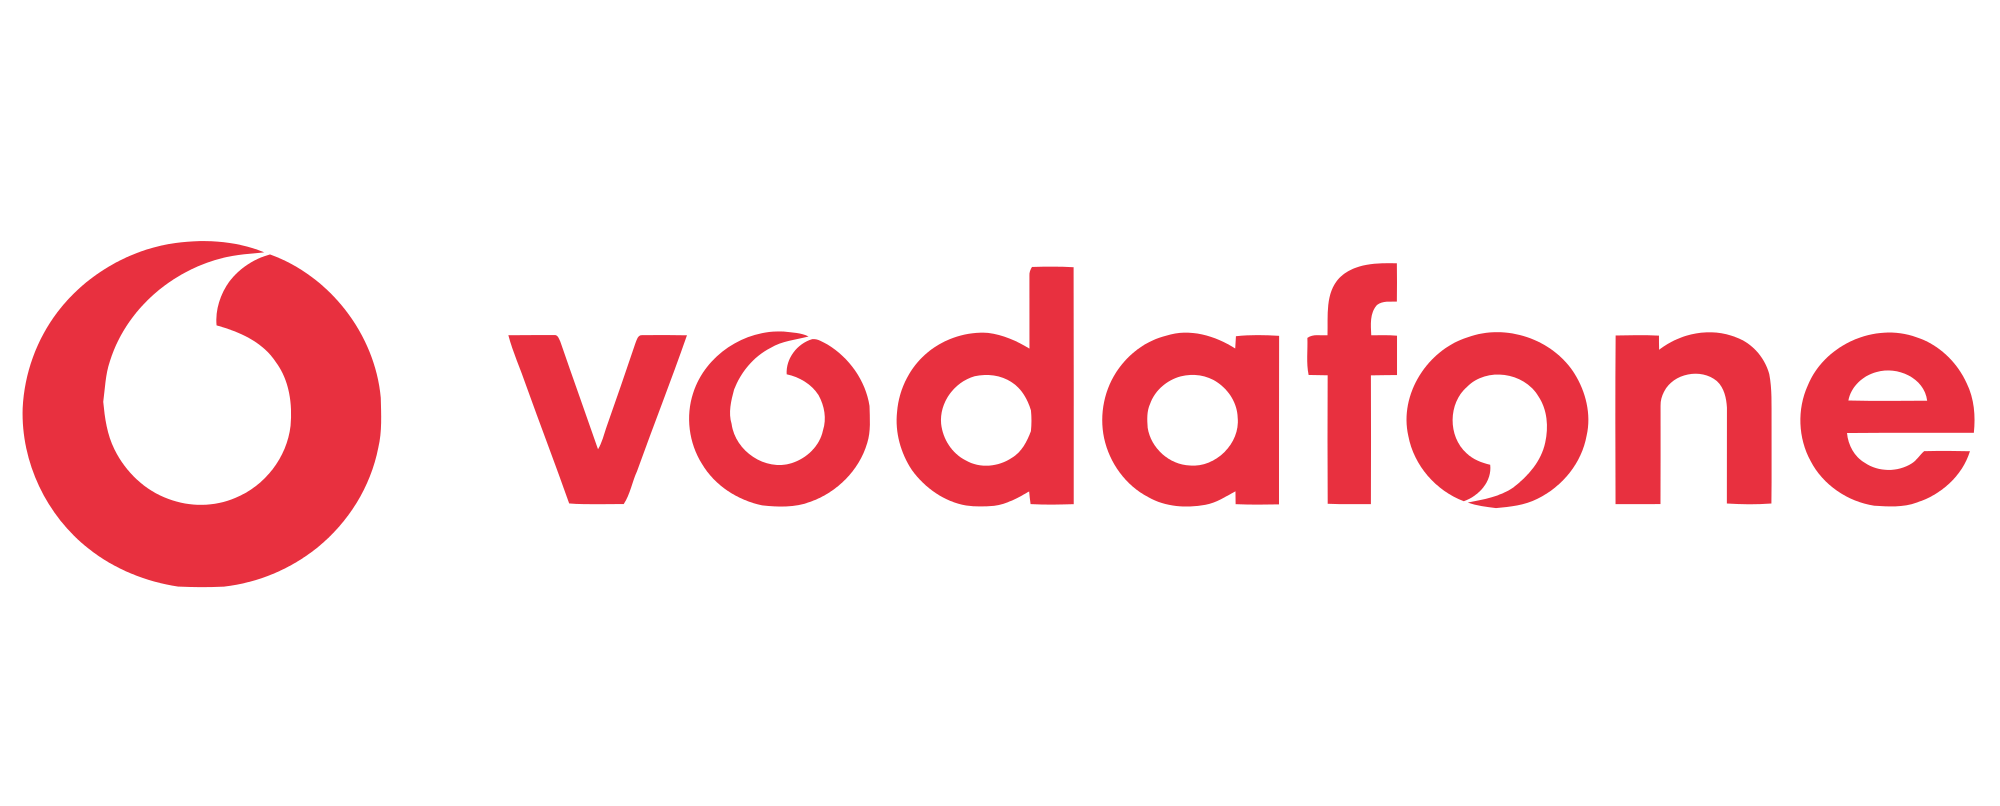 new-vodafone-logo-png-latest.png